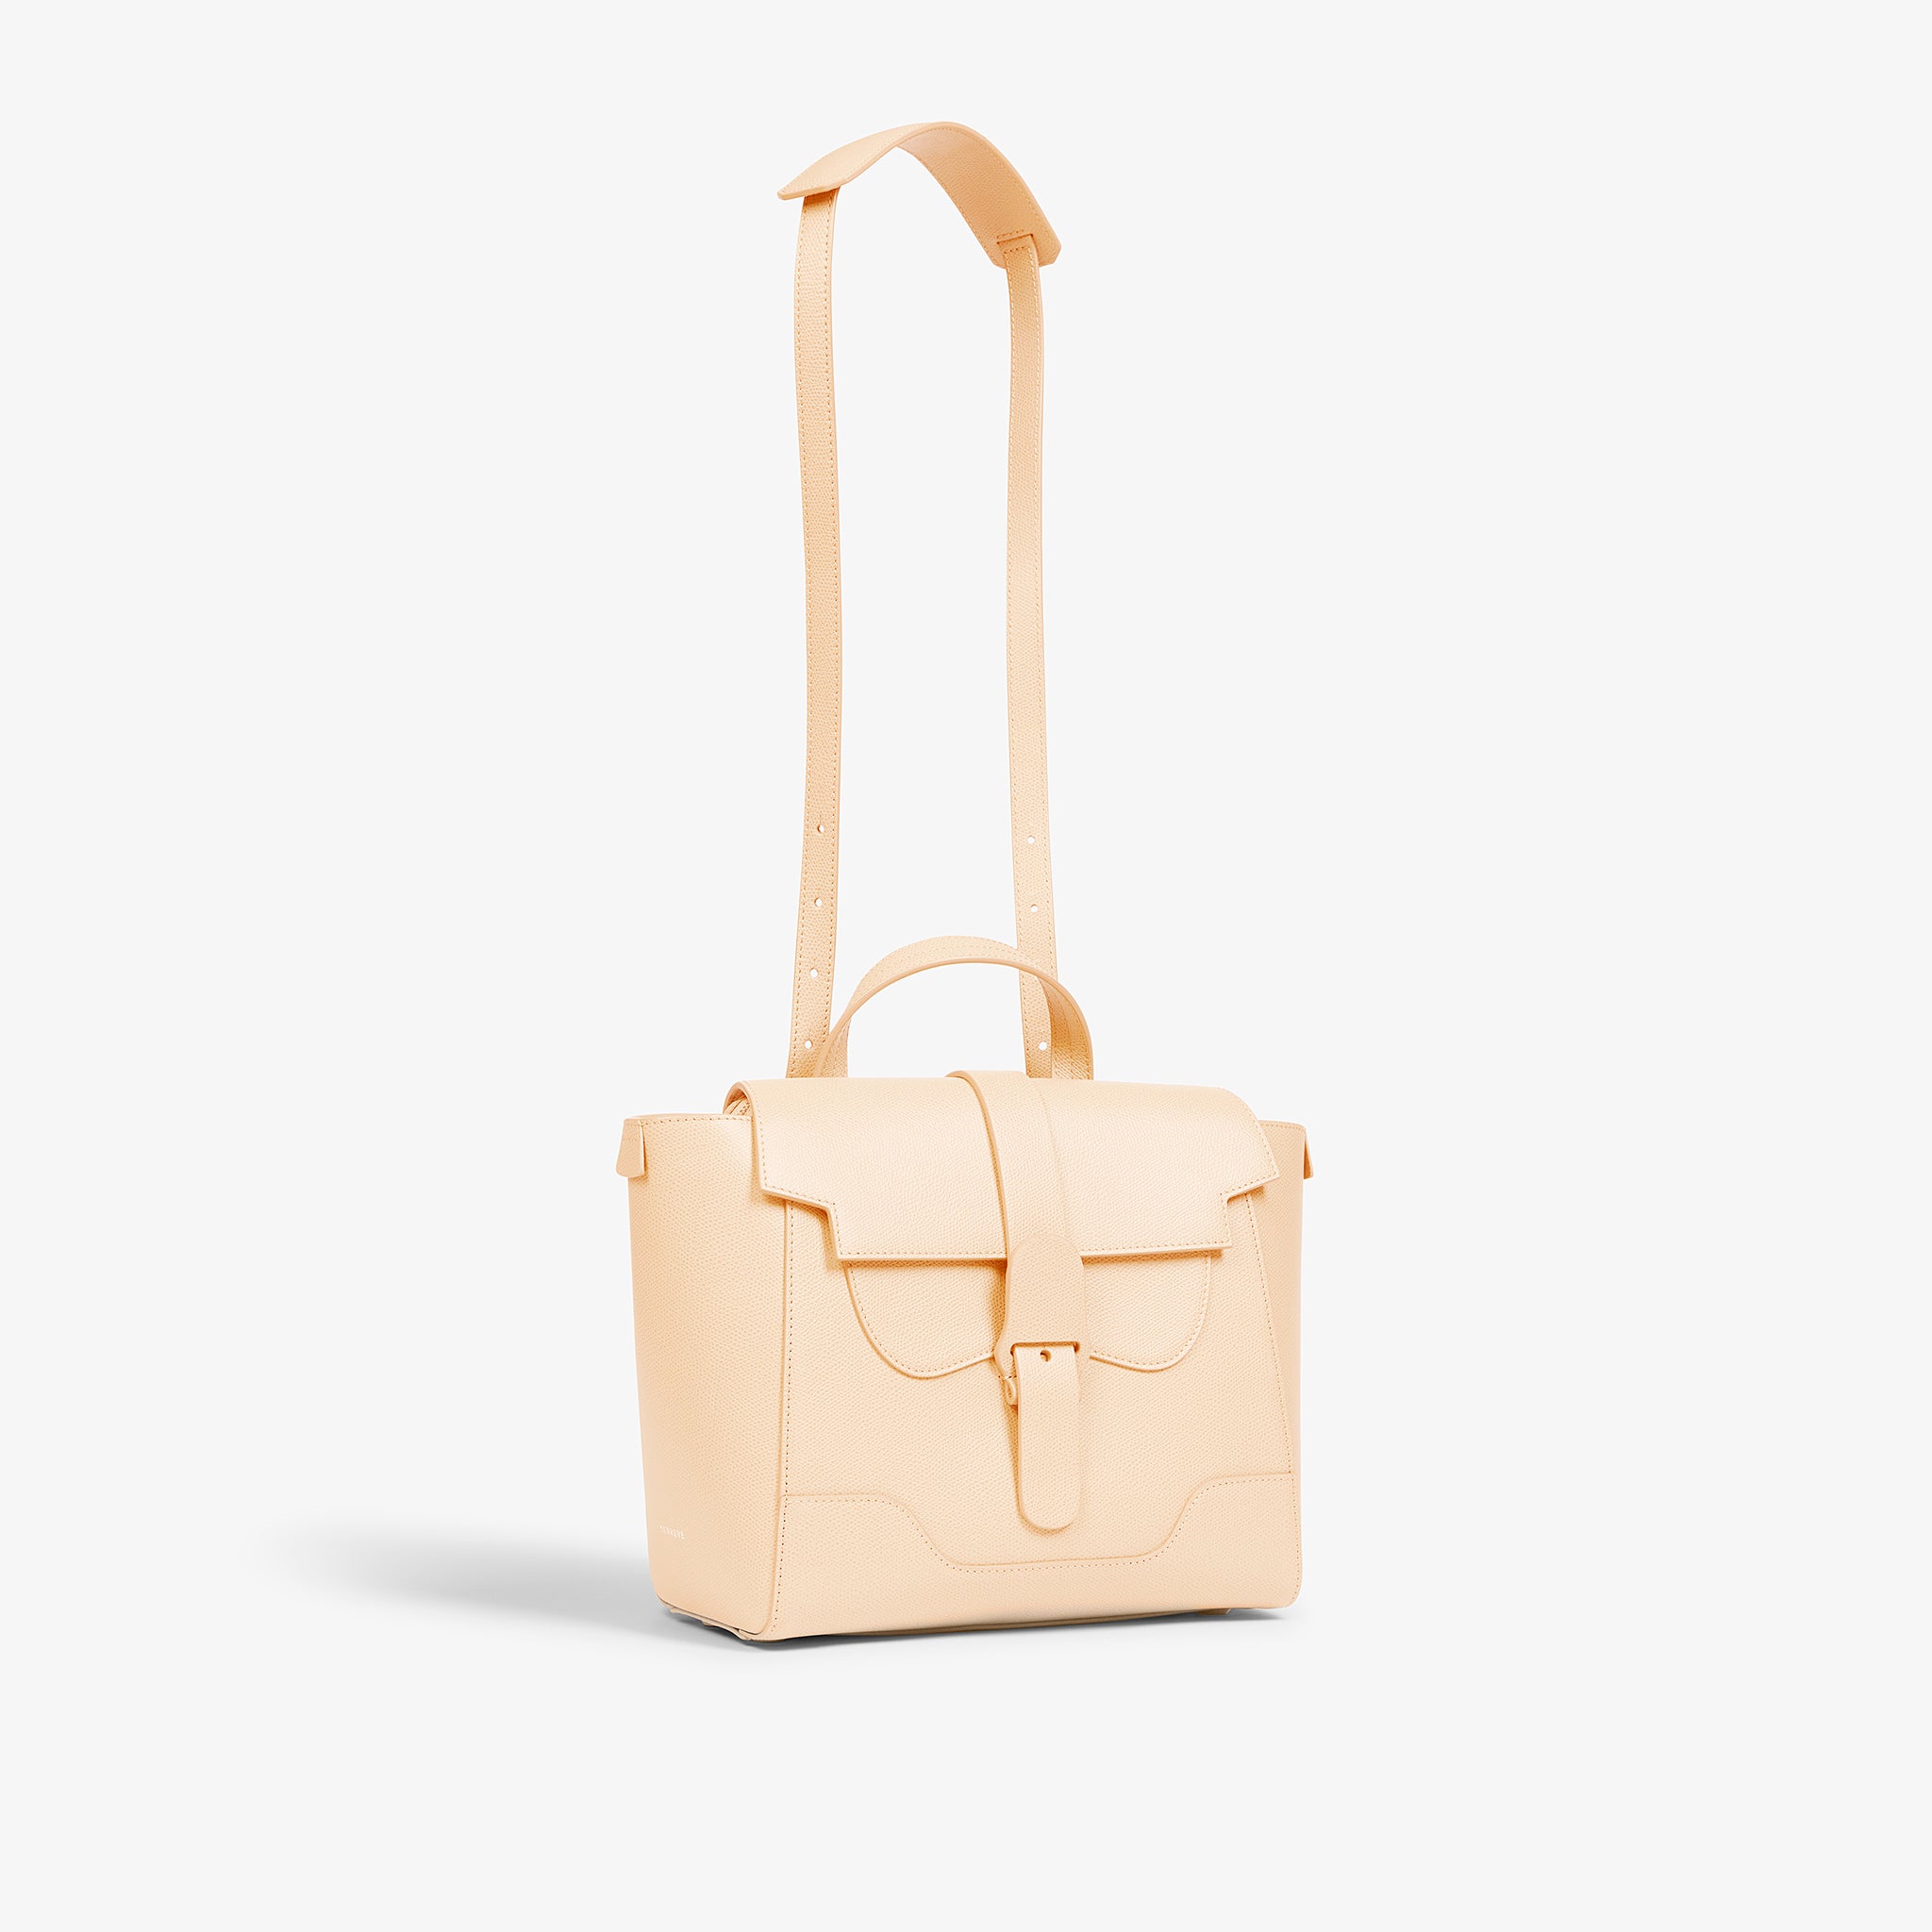 The Popular Senreve Maestra Bag Is on Sale Right Now